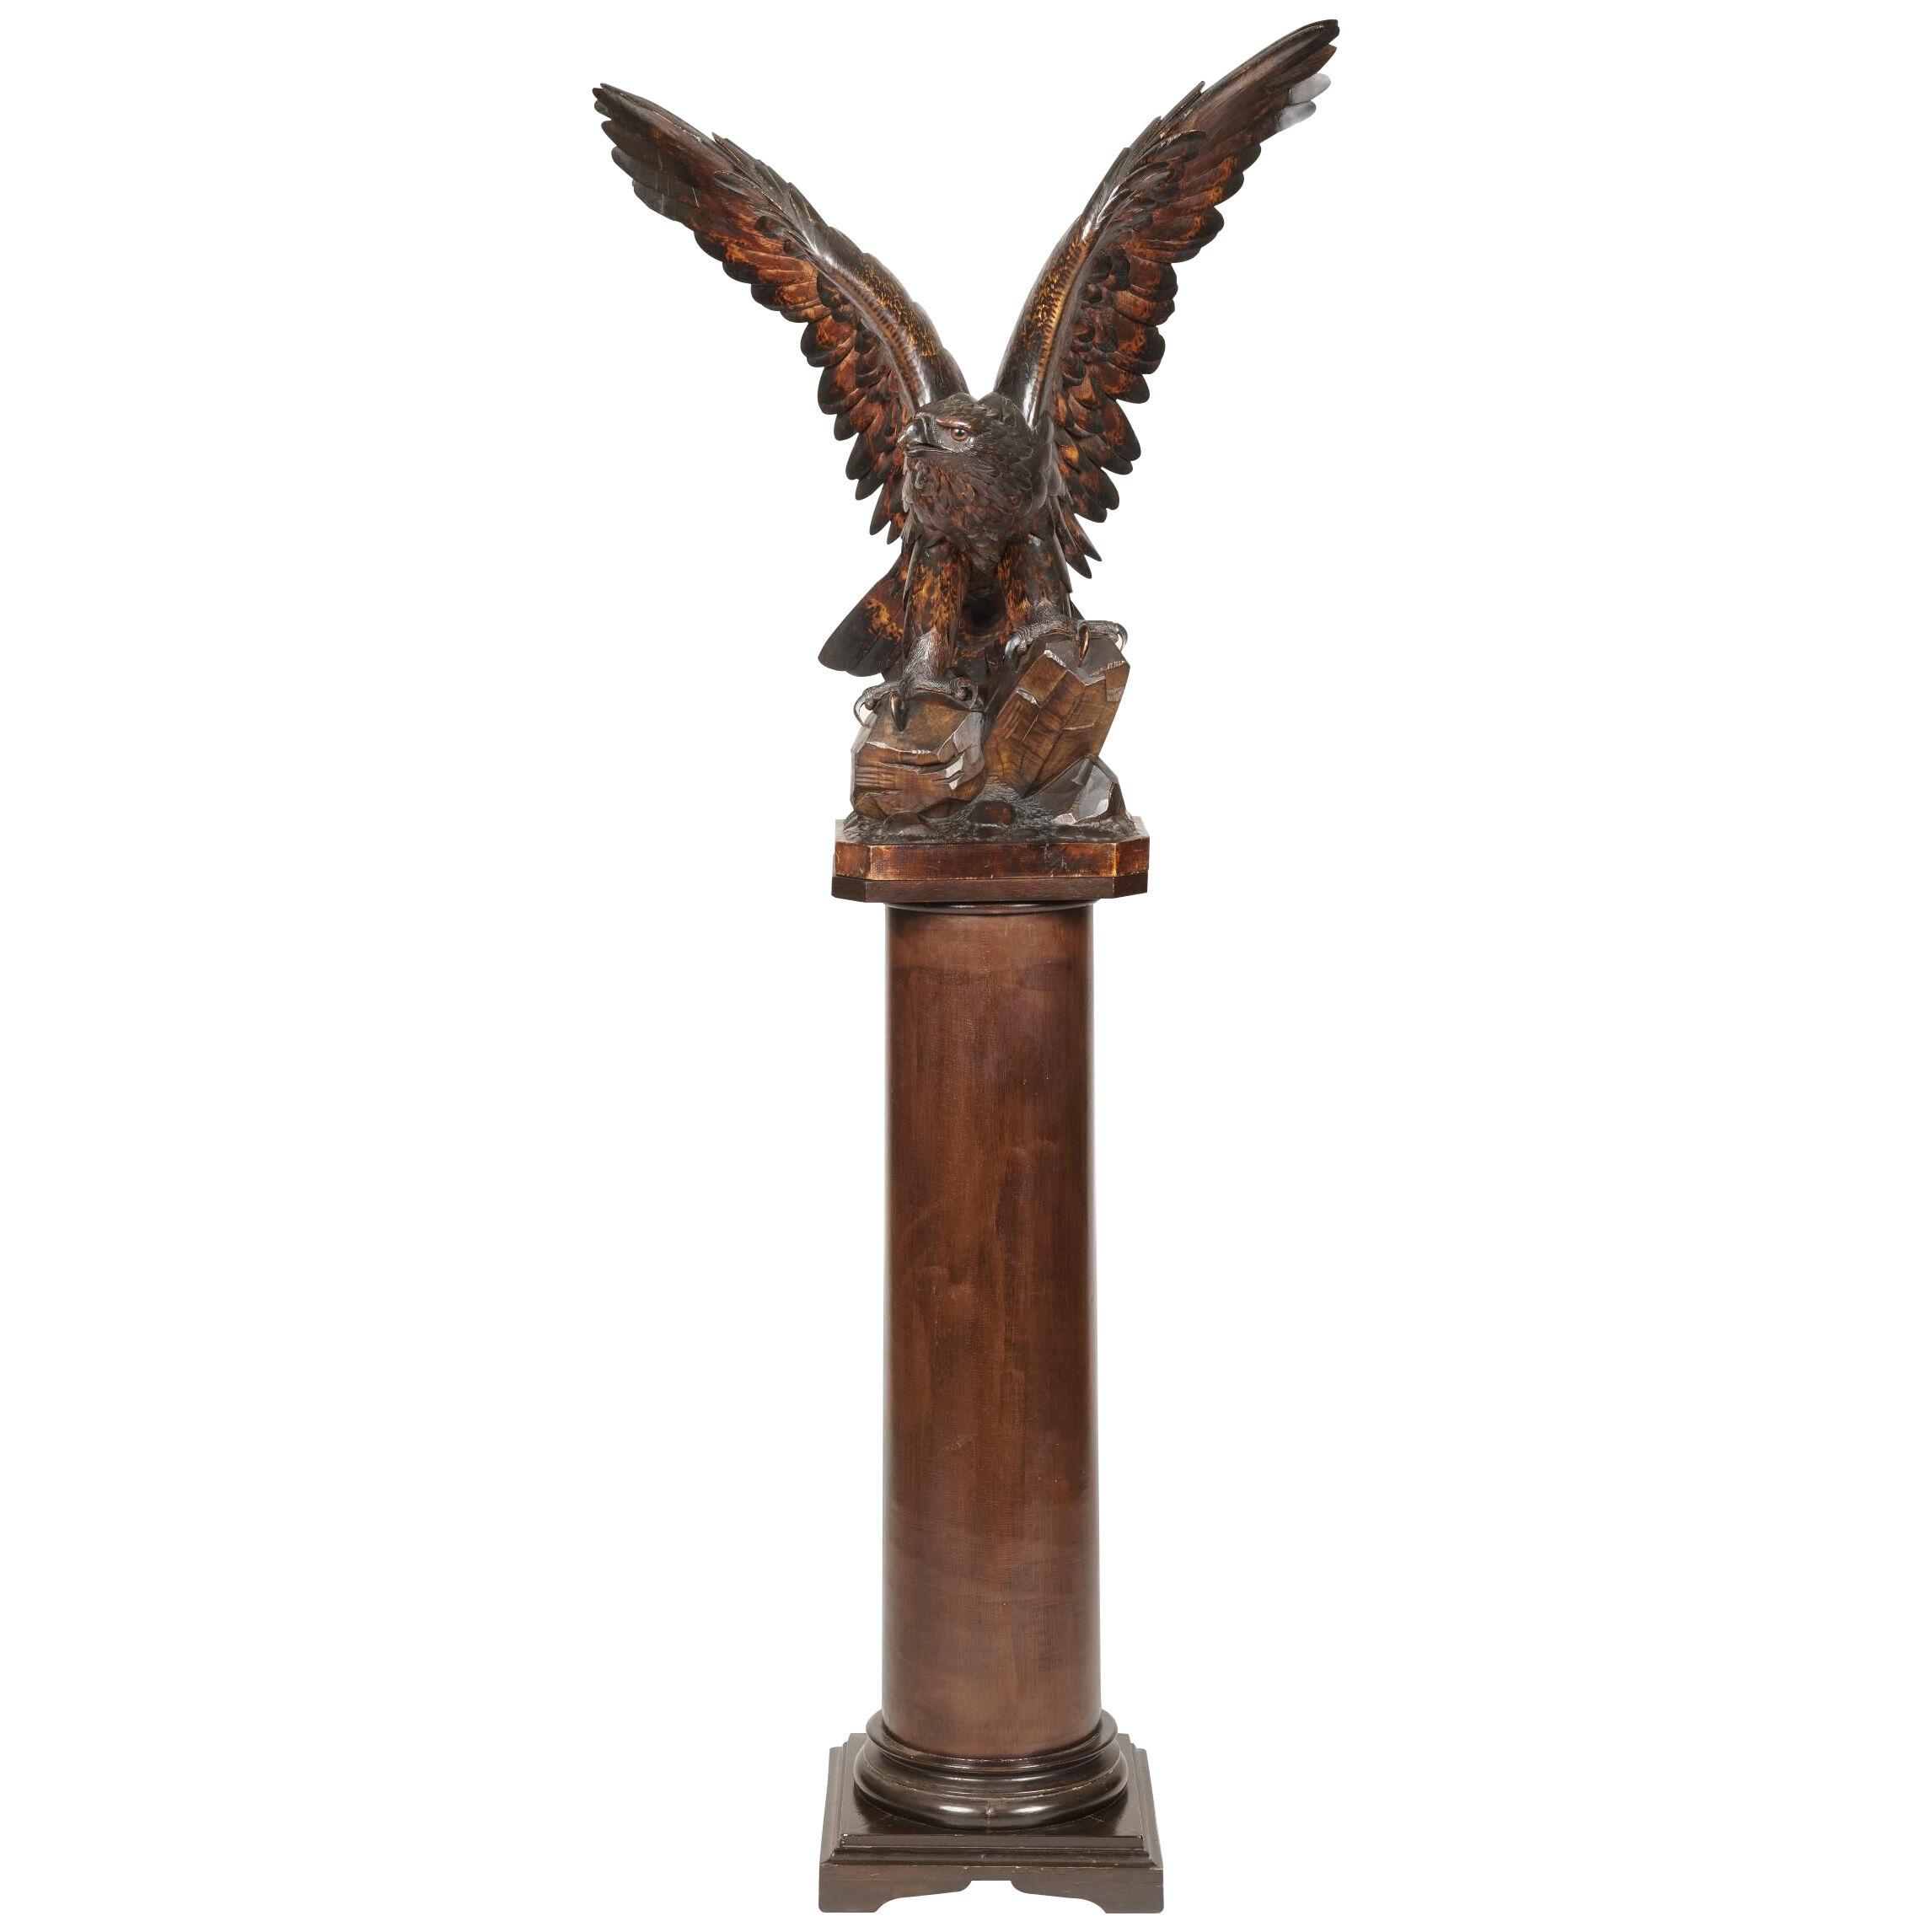 19th Century Black Forest Sculpture of an Eagle on Pedestal